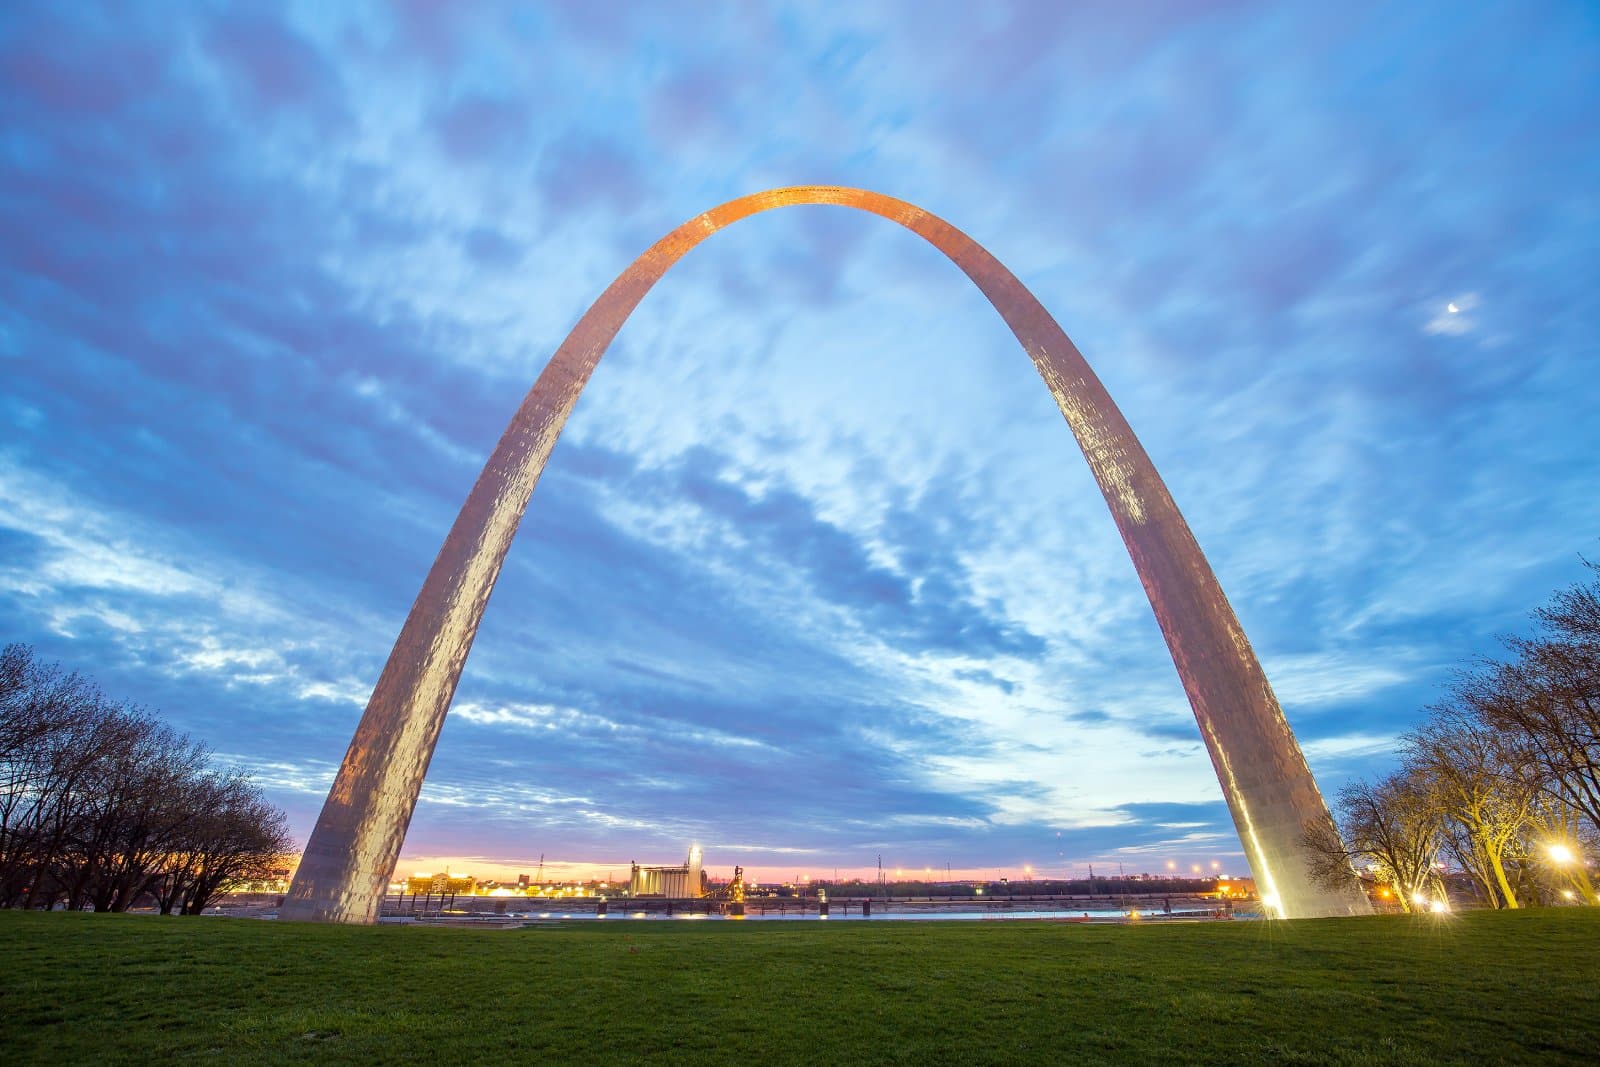 <p>Missouri earns around $17.5 billion from tourism, with the Gateway Arch National Park offering free admission but charging for tram rides to the top.</p>